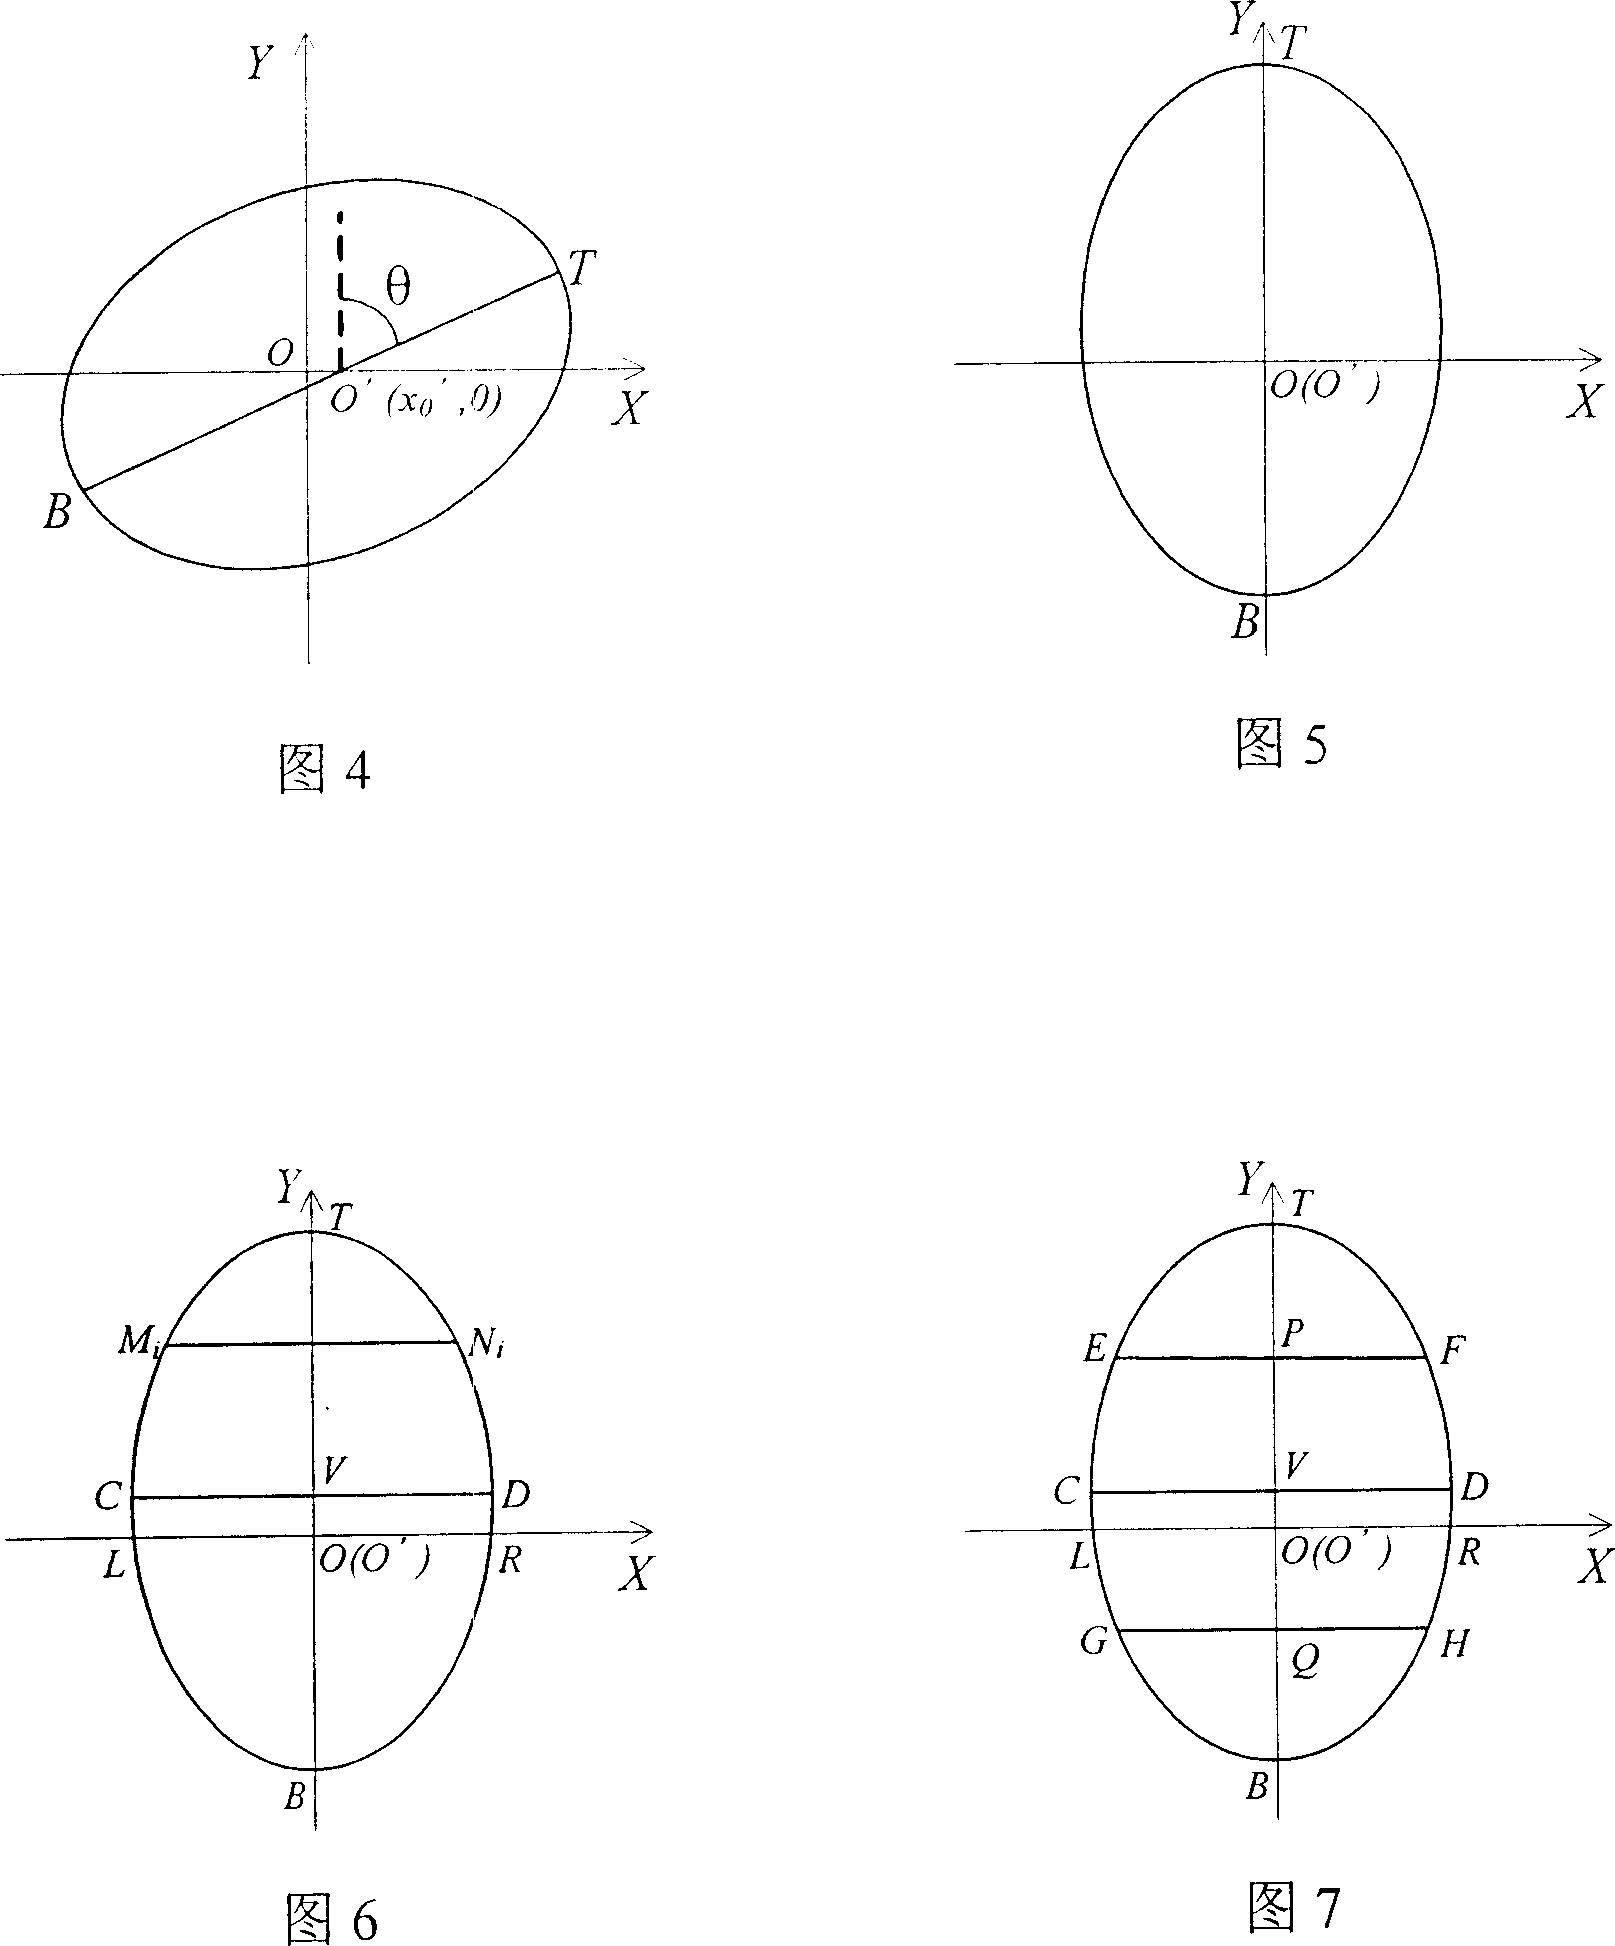 Method for concurrently detecting avian egg size, egg shape index and weight